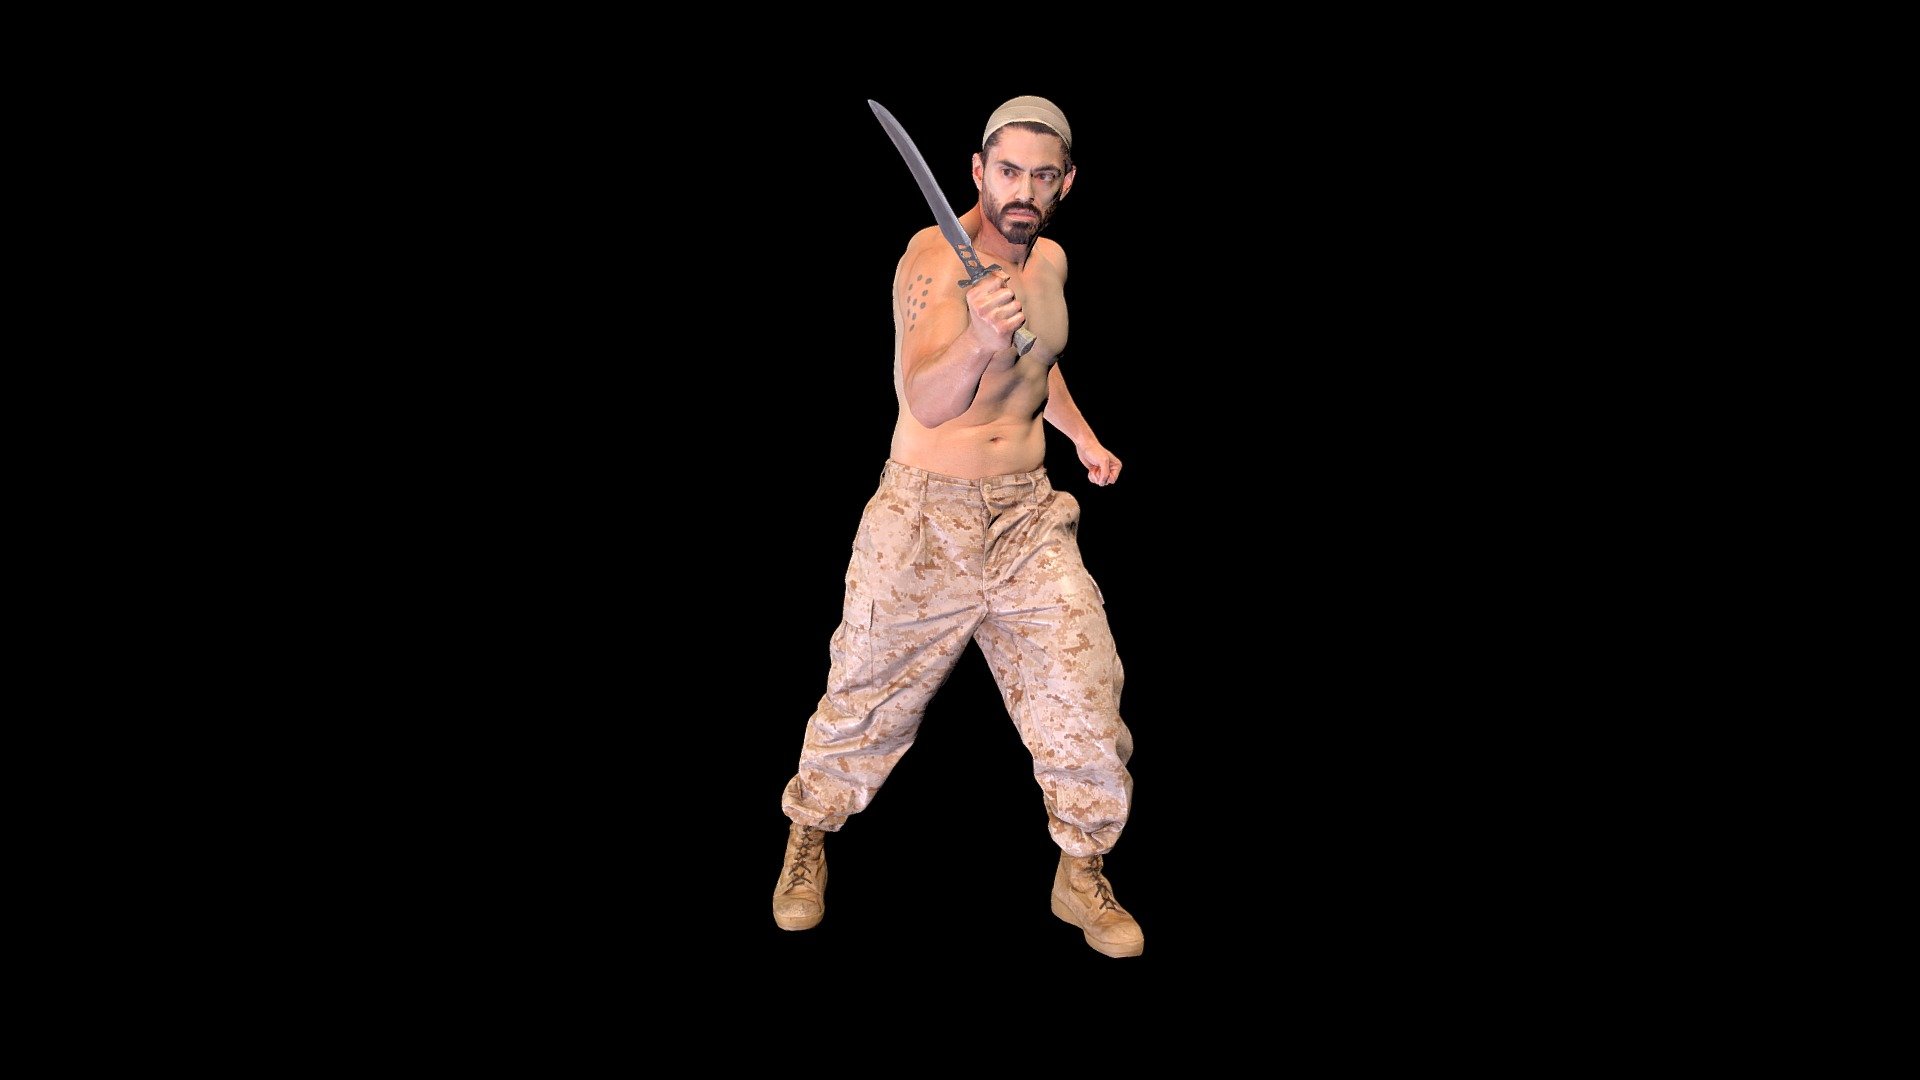 Victor holding a knife stance.

Product Features:




Game Engine and PBR ready

High Poly

Textures:

All maps are in PNG format.




Diffuse Map (8192x8192)

Specular Map (8192x8192)

Roughness Map (8192x8192)

Normal Map (8192x8192)

SSS Map (8192x8192)

Model Polycounts:




159828 Faces

79894 Vertices

Available File Formats:




OBJ

FBX

About Human Engine:

Using our 150 DSLR Photogrammetry rig, we create 3D and 4D assets for Games, VFX, Movies, Television, Virtual Reality and Augmented Reality. From 3D scanning to rigging, game-engine integration, we have your character creation needs covered 3d model